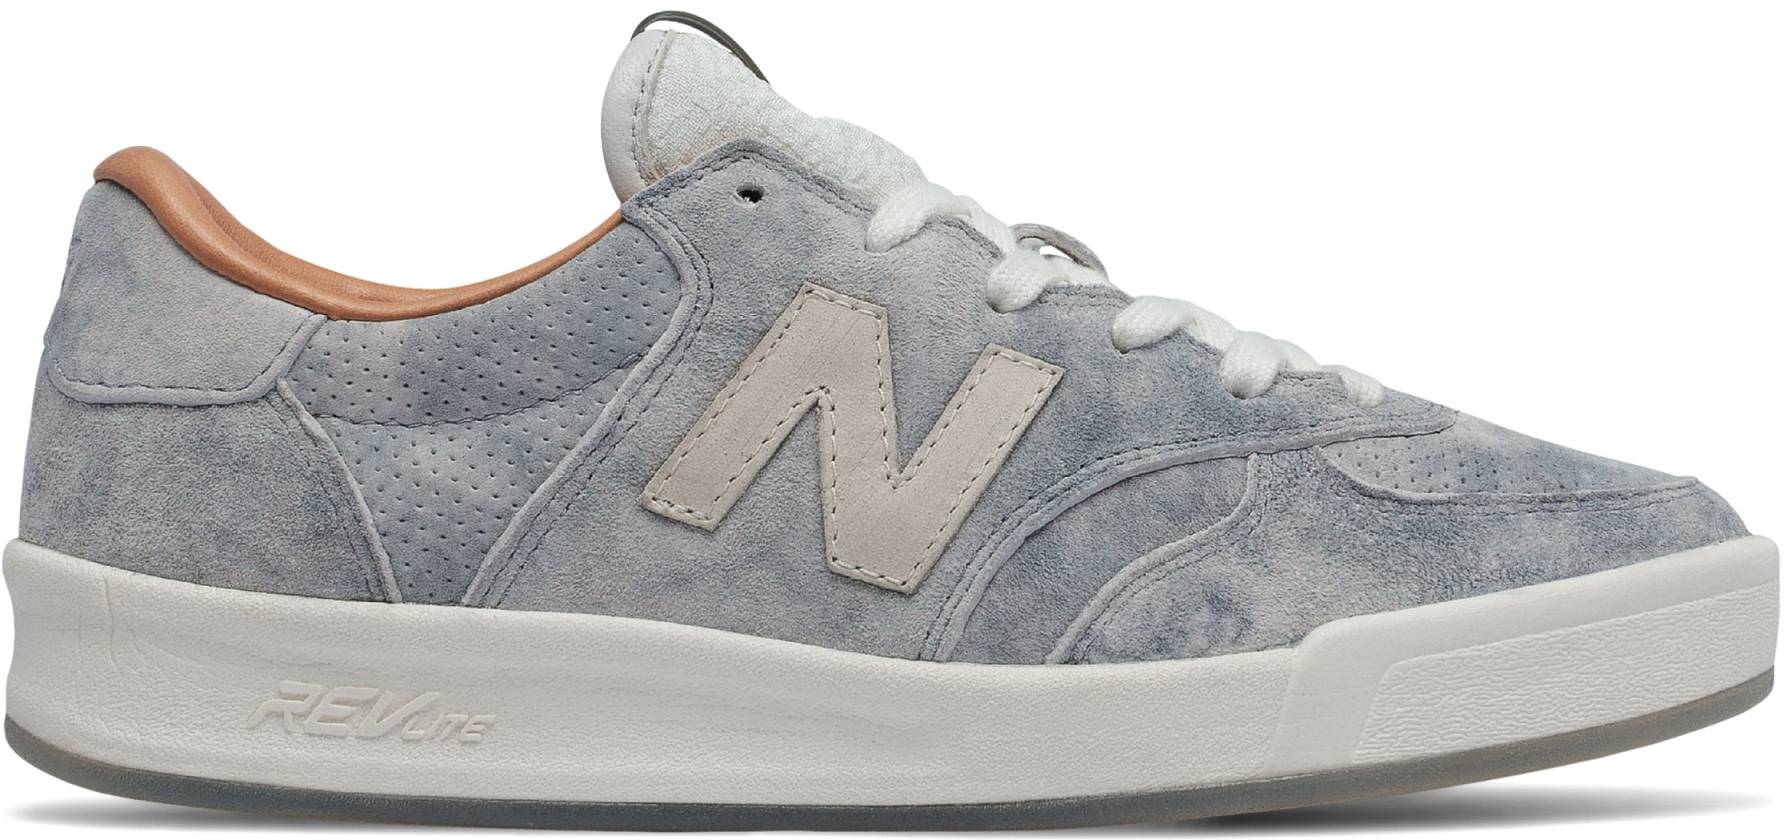 New Balance 300 Leather Shoes Reviews Reasons To Buy